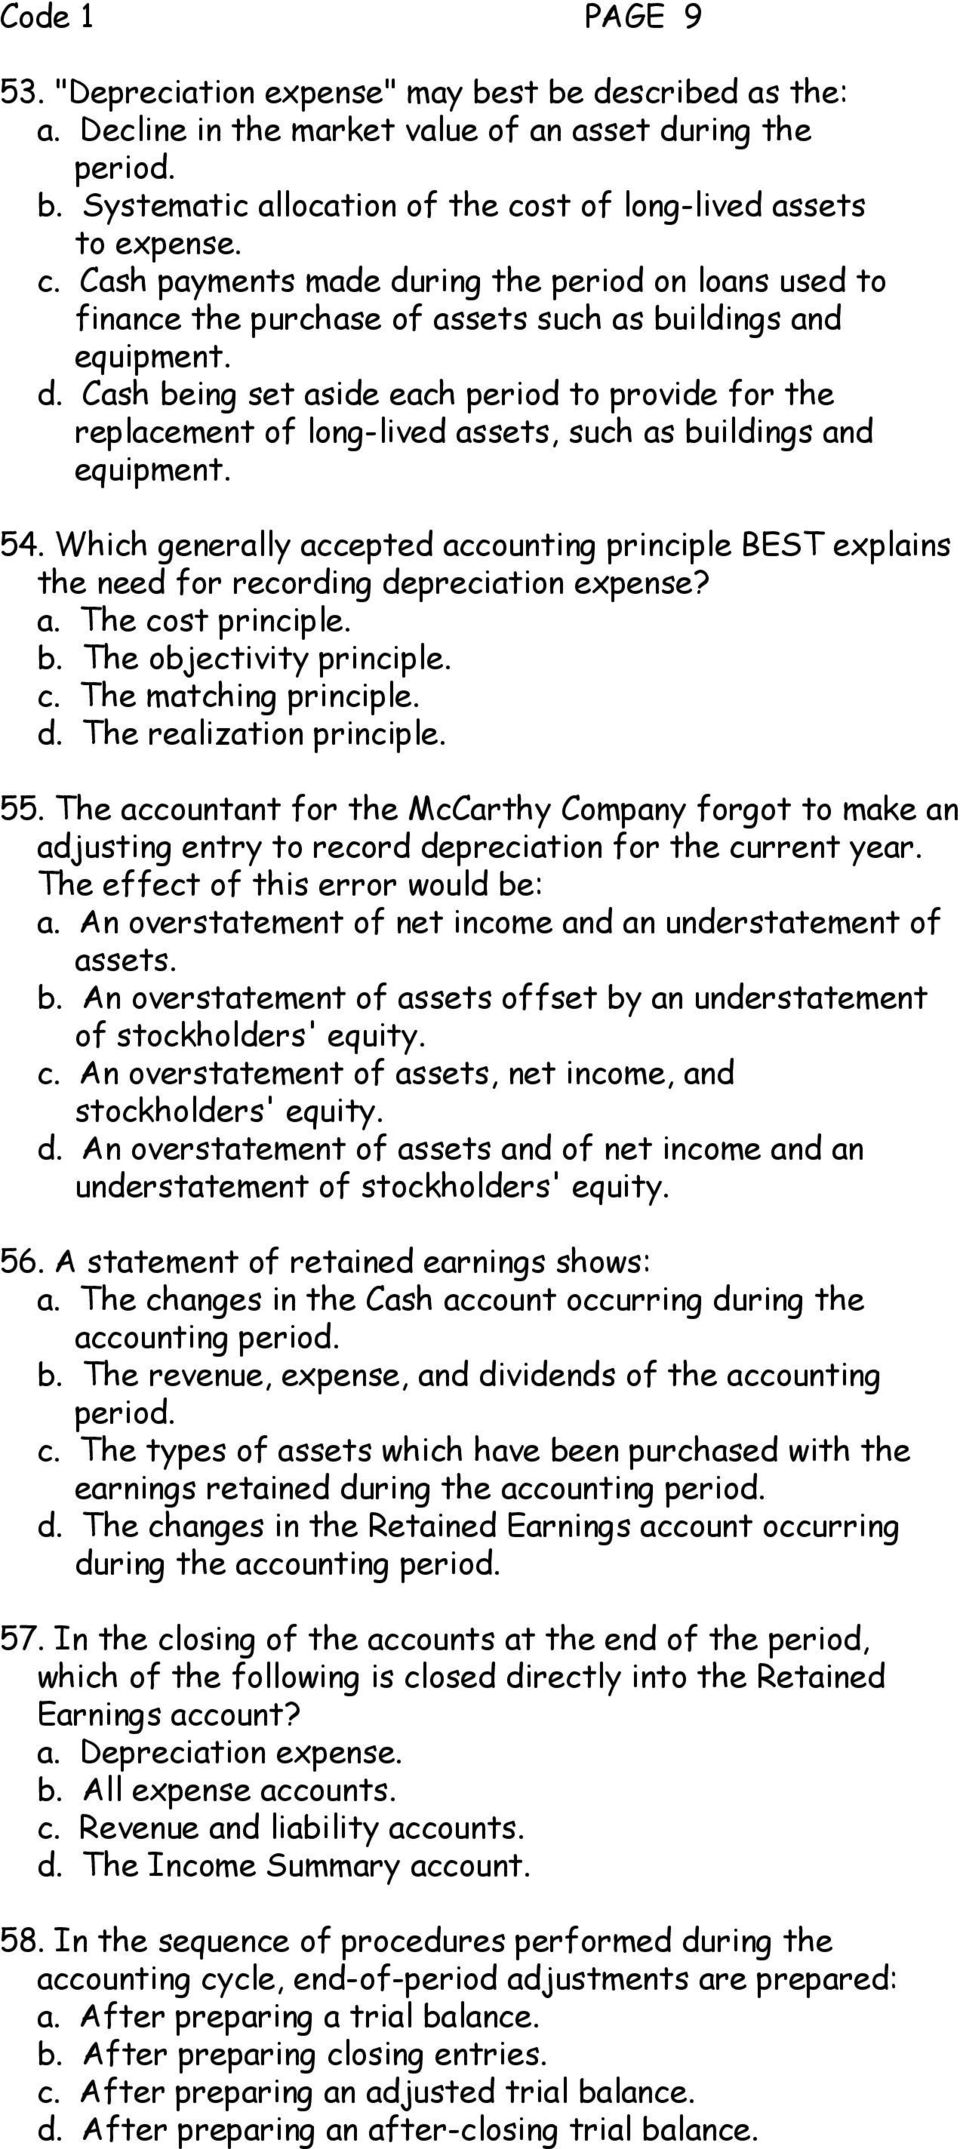 54. Which generally accepted accounting principle BEST explains the need for recording depreciation expense? a. The cost principle. b. The objectivity principle. c. The matching principle. d. The realization principle.